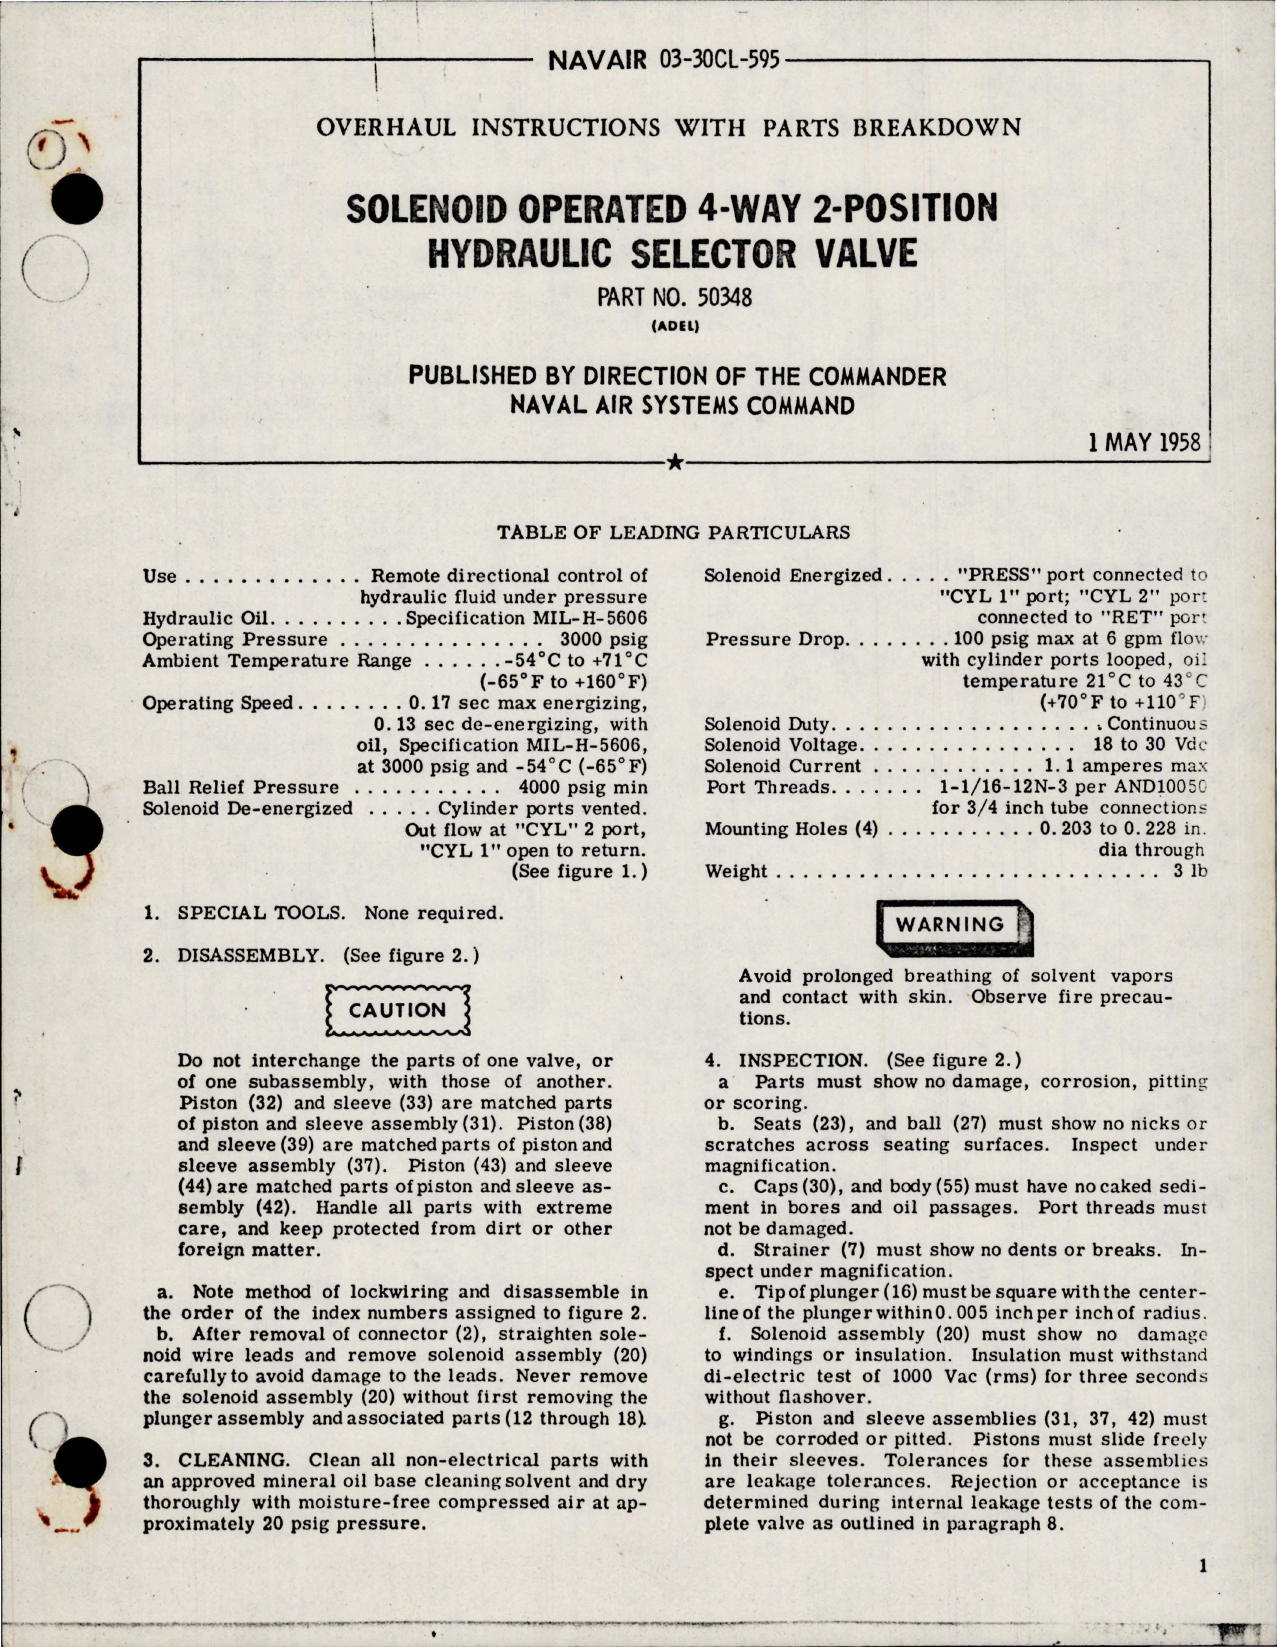 Sample page 1 from AirCorps Library document: Overhaul Instructions with Parts for Solenoid Operated 4Way 2 Position Hydraulic Selector Valve - Part 50348 